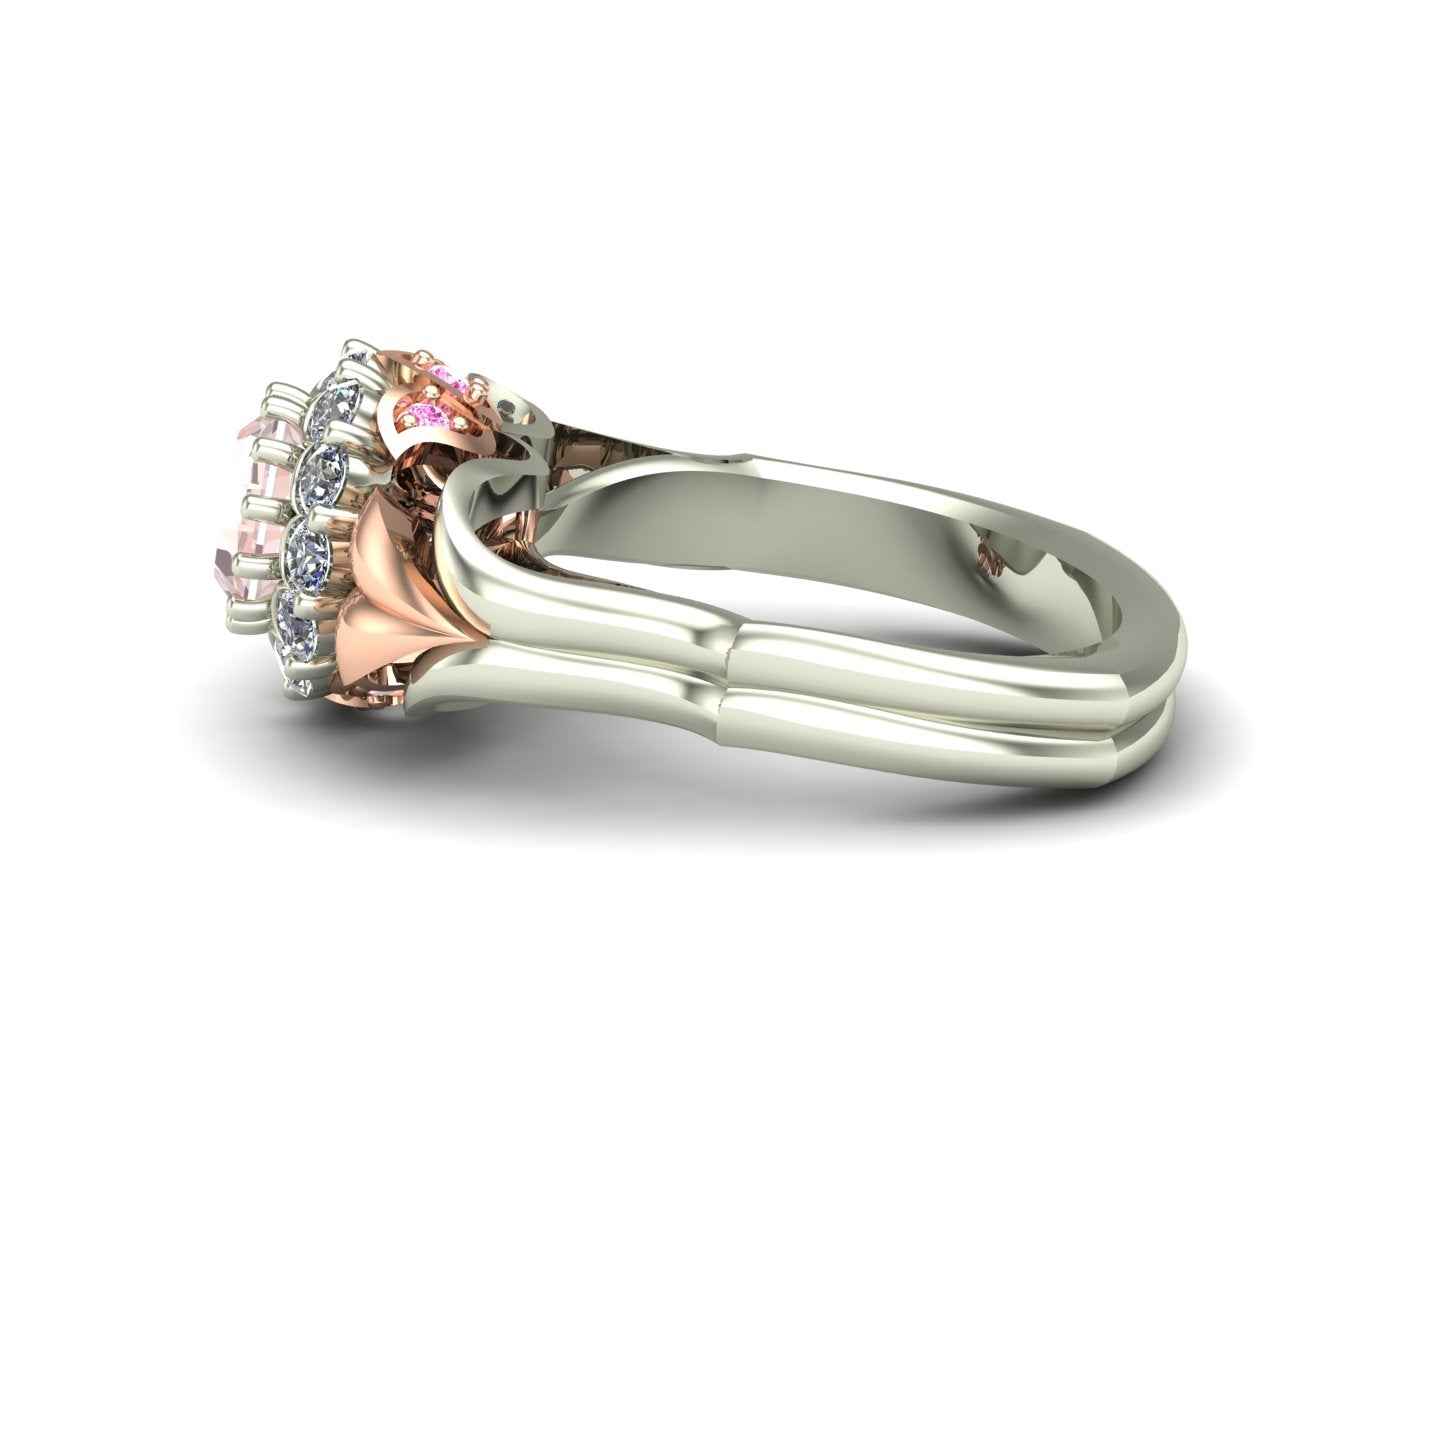 Morganite two tone flower ring with pink diamonds in 14k rose and white gold - Charles Babb Designs - side view